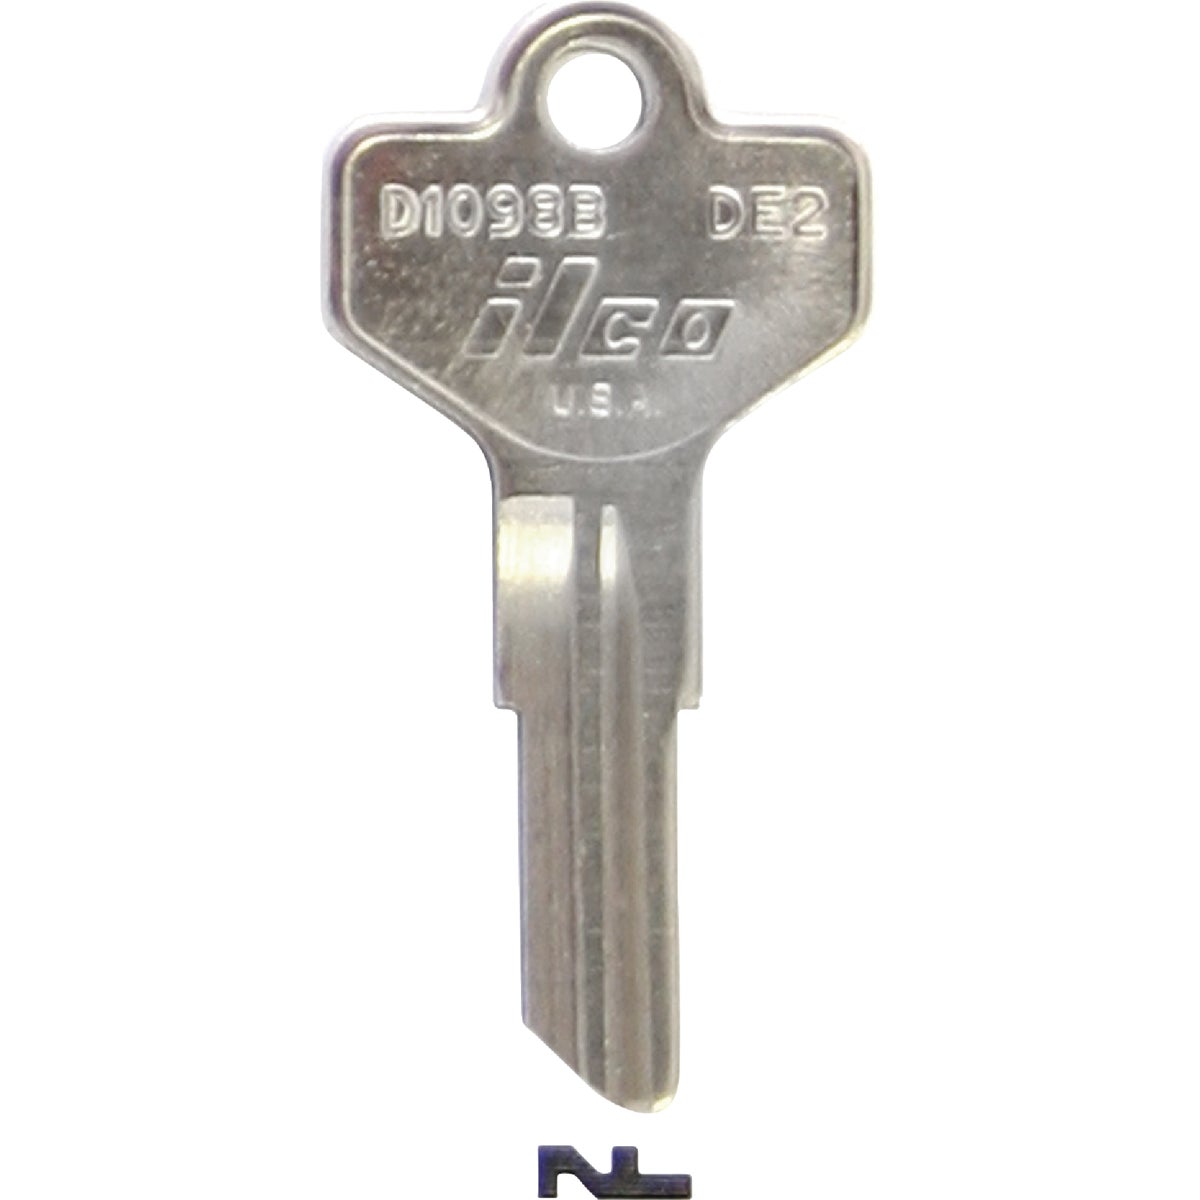 Item 200484, Nickel-plated key blank. When you order one, you will receive 10 keys.